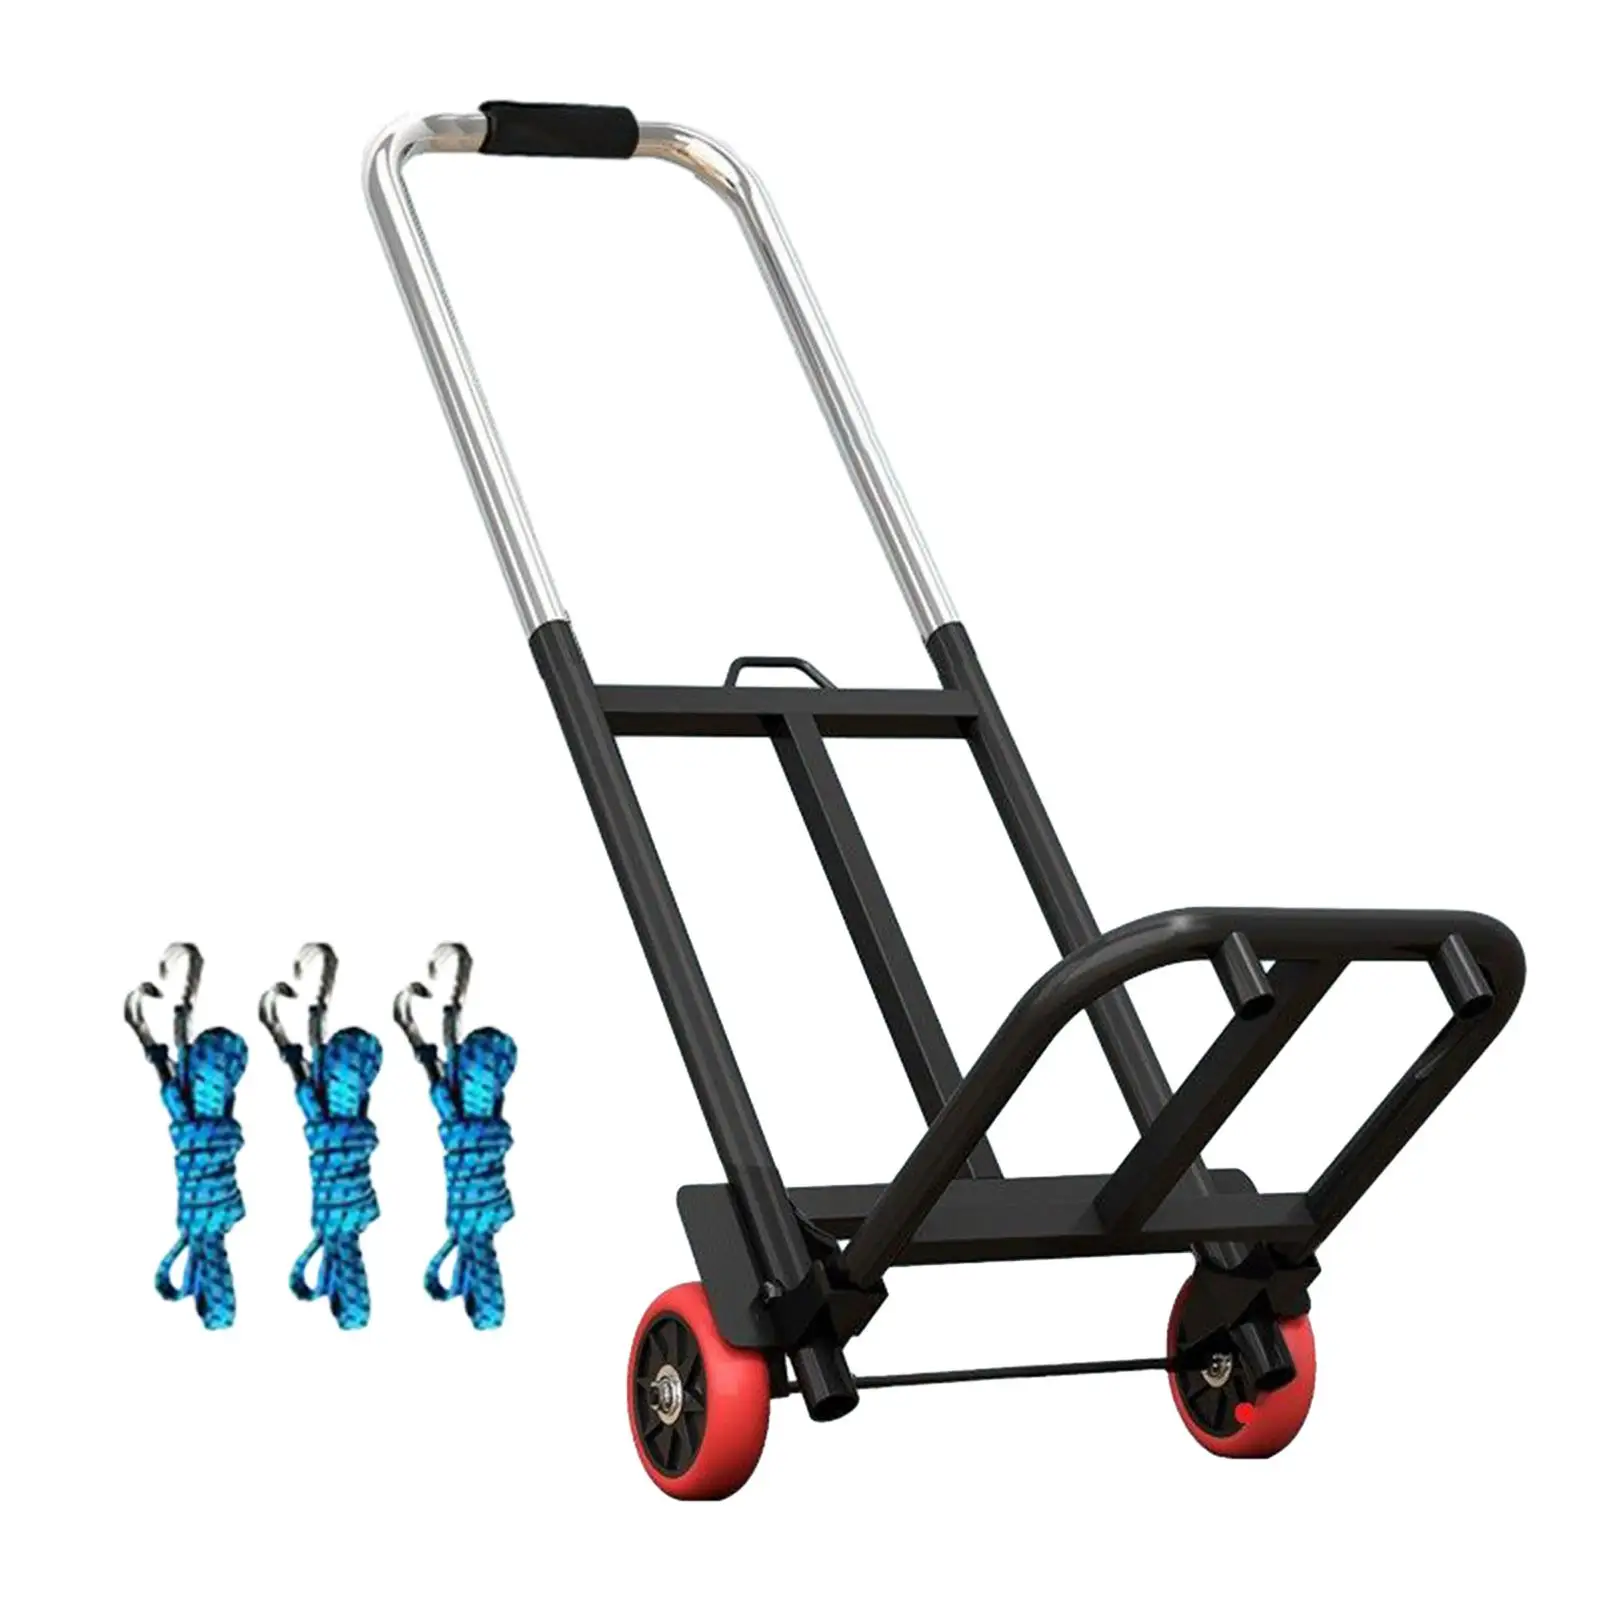 Foldable Hand Truck Luggage Hand Cart Shopping Cart 27x40cm Platform with 2 Wheels for Home Moving and Travel Convenient